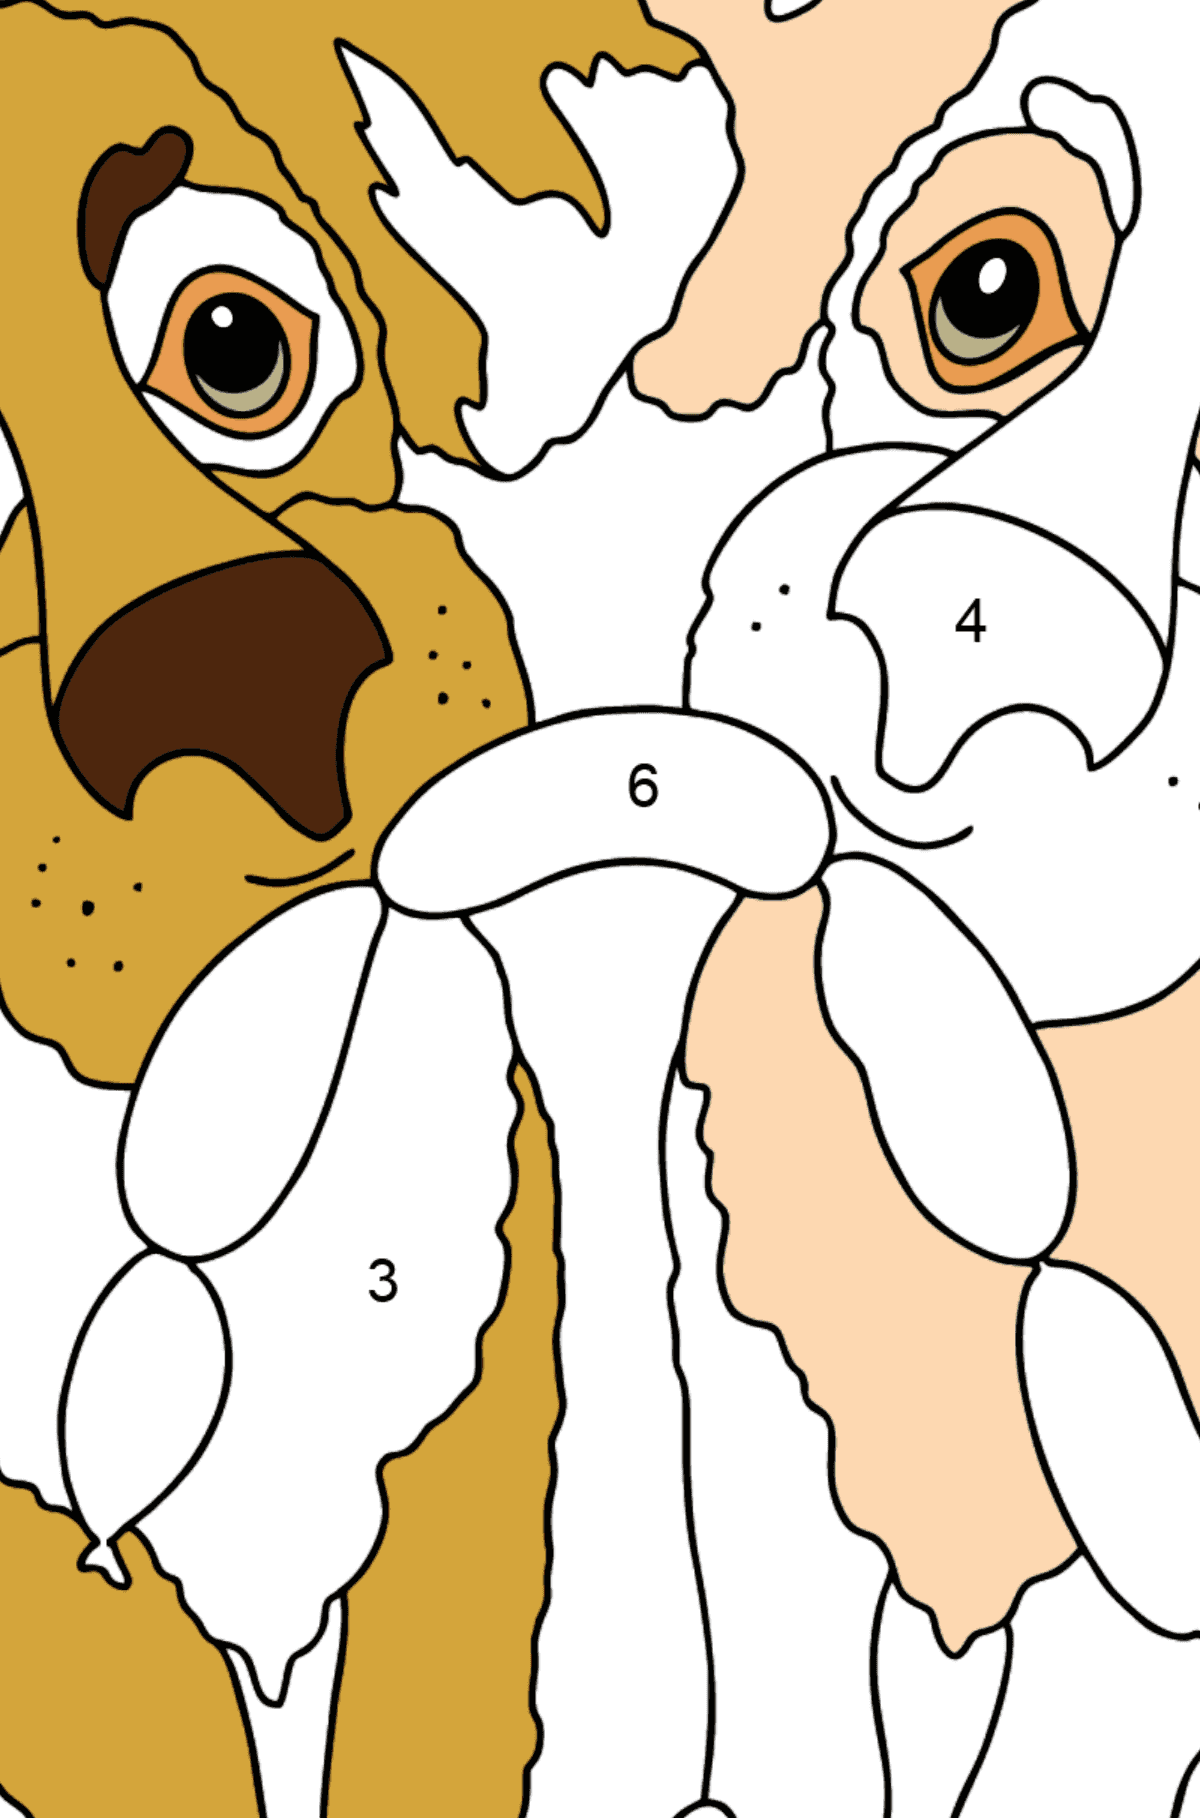 Coloring Page - Dogs Can't Share Sausages - Coloring by Numbers for Kids